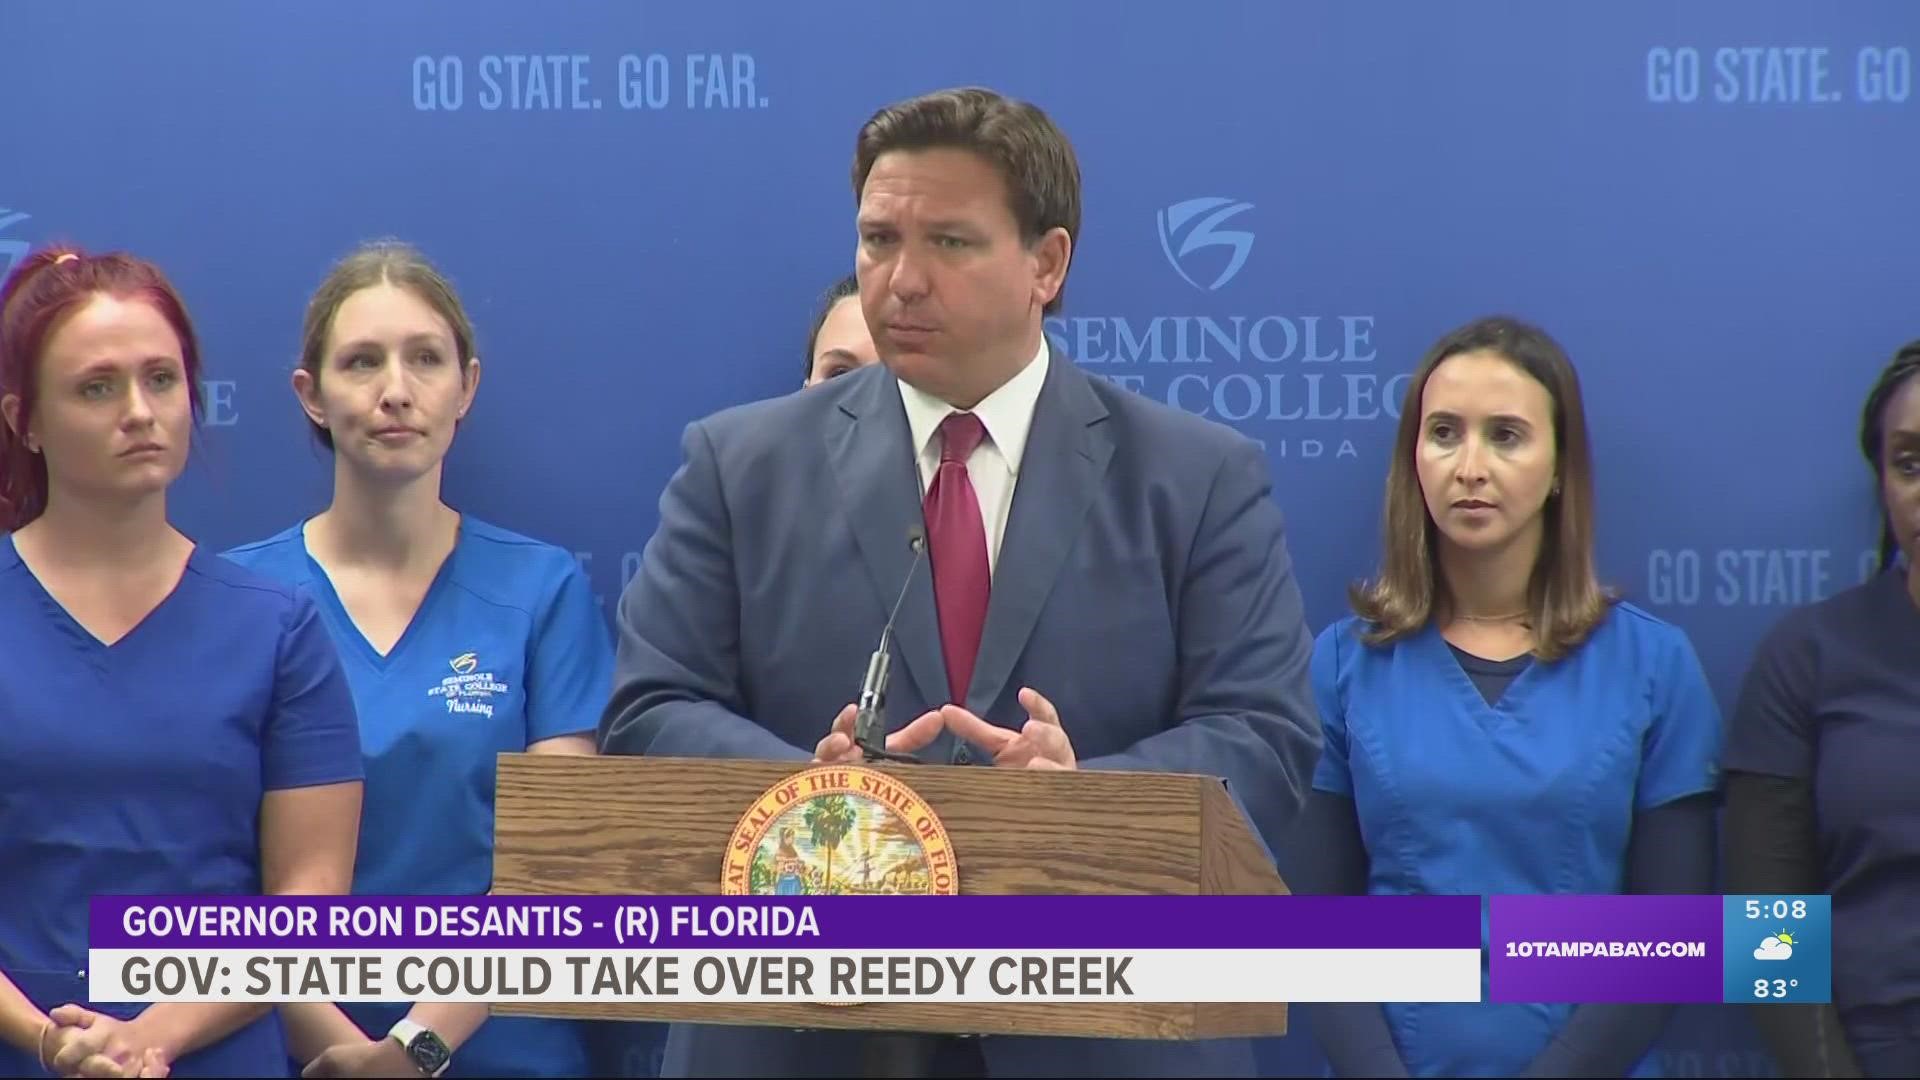 The governor also said that central Florida taxpayers will not be responsible for Reedy Creek’s $766 million debt.